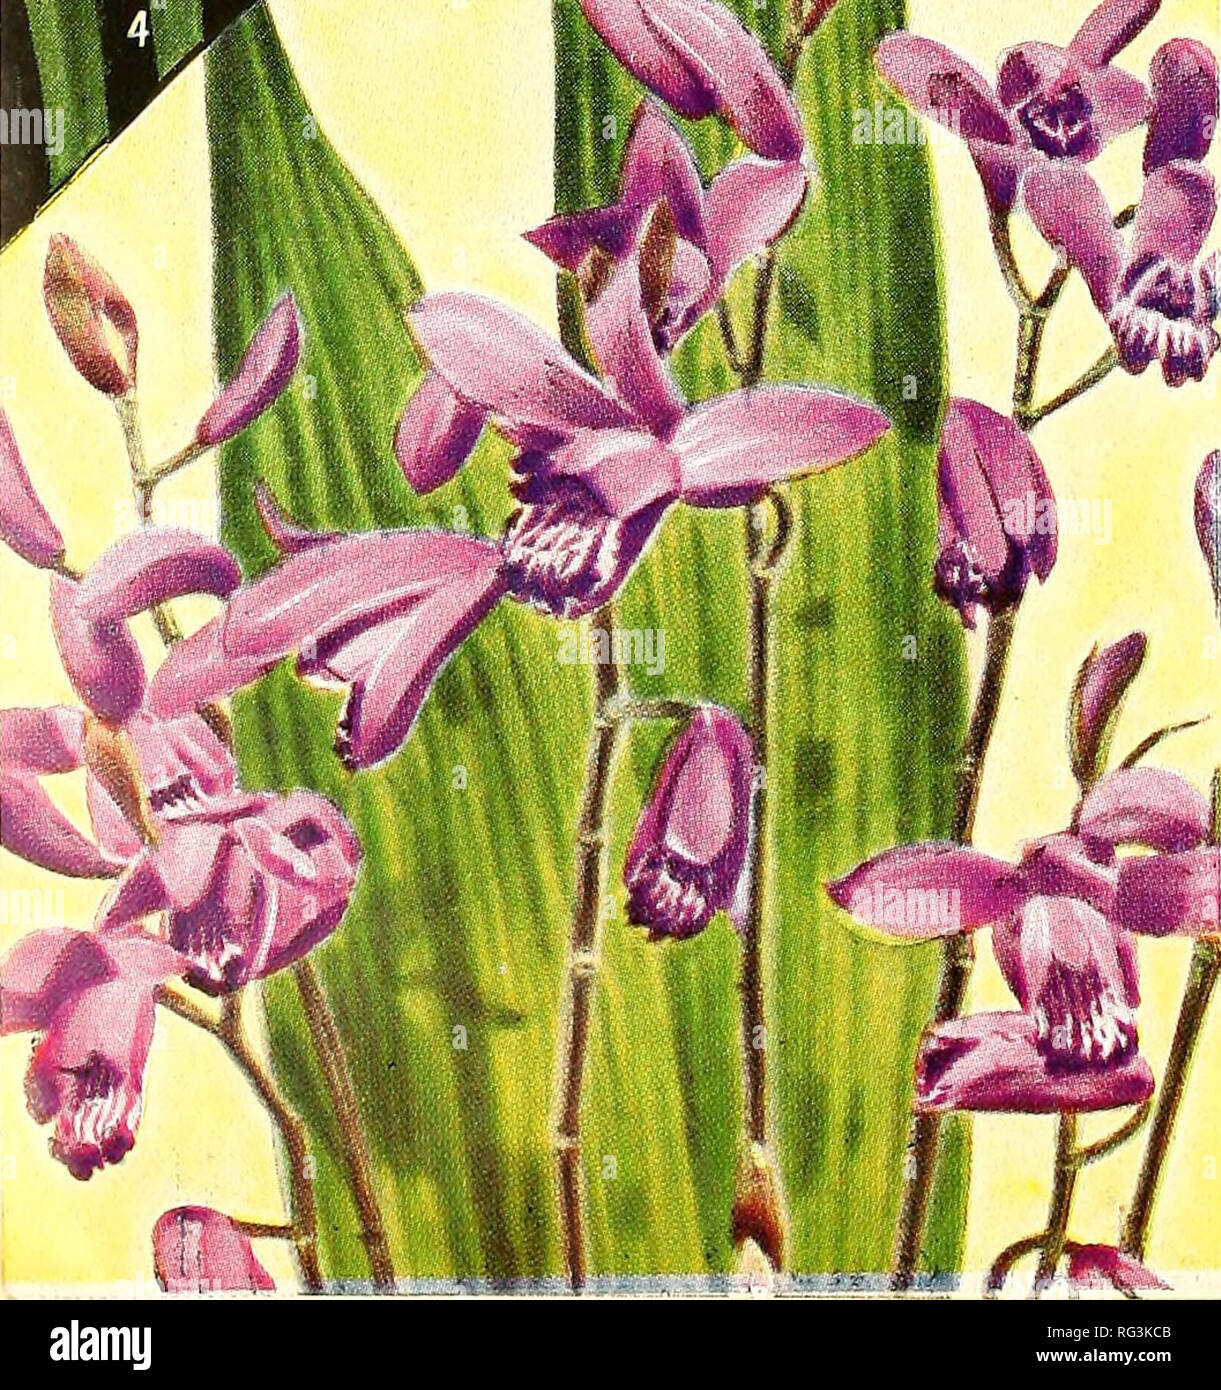 . California gardening. Nurseries (Horticulture) Catalogs; Flowers Seeds Catalogs; Plants, Ornamental Catalogs; Vegetables Seeds Catalogs; Fruit trees Catalogs; Trees Catalogs; Grasses Seeds Catalogs. Mrs. Van Konynenb u r g. The best blue Gladiolus, clear bluish violet. lUc each; $1.00 doz. 2. Betty Nuthall. Beau- tiful warm light coral, with pale orange throat. 10c each; $1.00 doz. 3. Mrs. Leon Douglas. A giant in size; gorgeous begonia rose flaked fiery scarlet. 10c each; $1.00 ioz. 4. Souvenir. The most popular of all yellow Gladiolus. 10c each; $1.00 doz. 7. Copper Bronze. One of the most Stock Photo